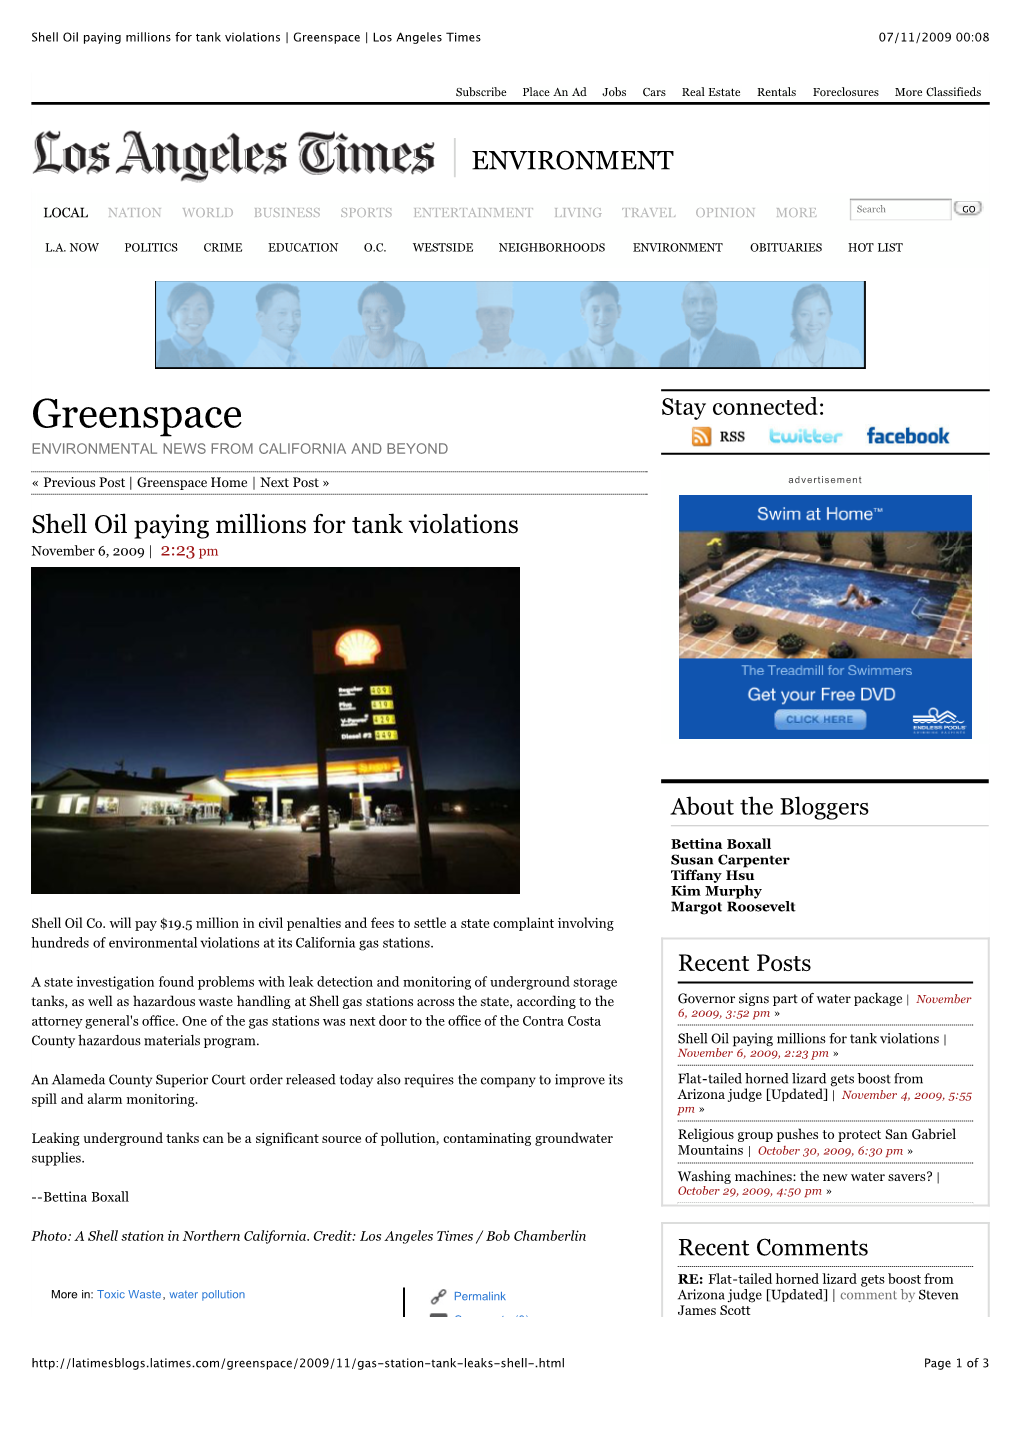 Shell Oil Paying Millions for Tank Violations | Greenspace | Los Angeles Times 07/11/2009 00:08